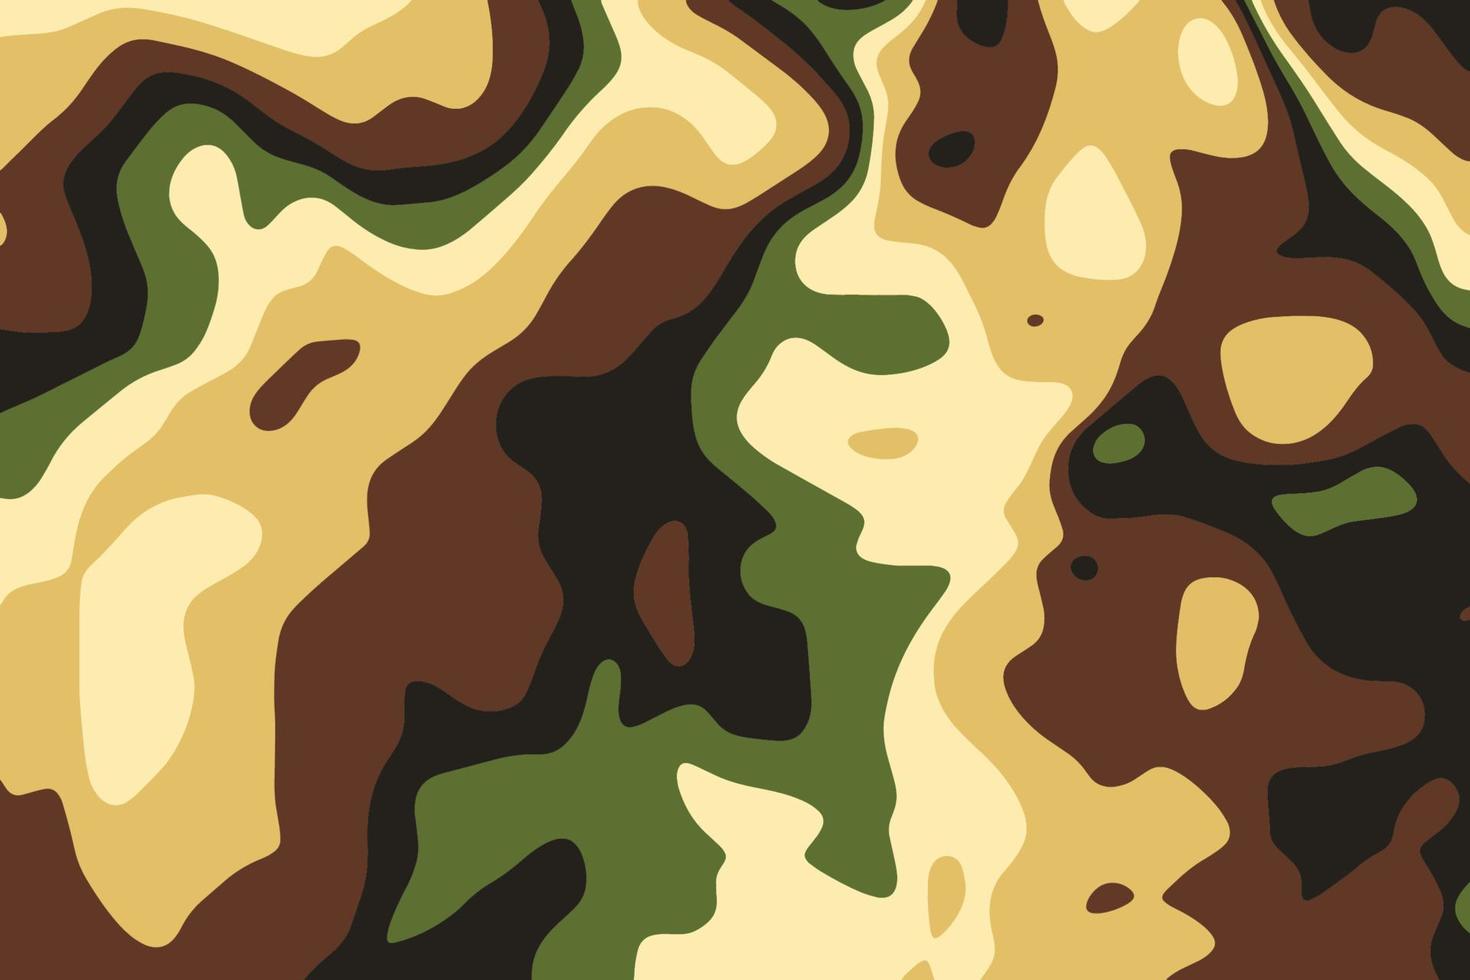 Camouflage military abstract background. Woodland pattern. Modern wavy spots in khaki colors. Trendy green brown black olive colors texture vector